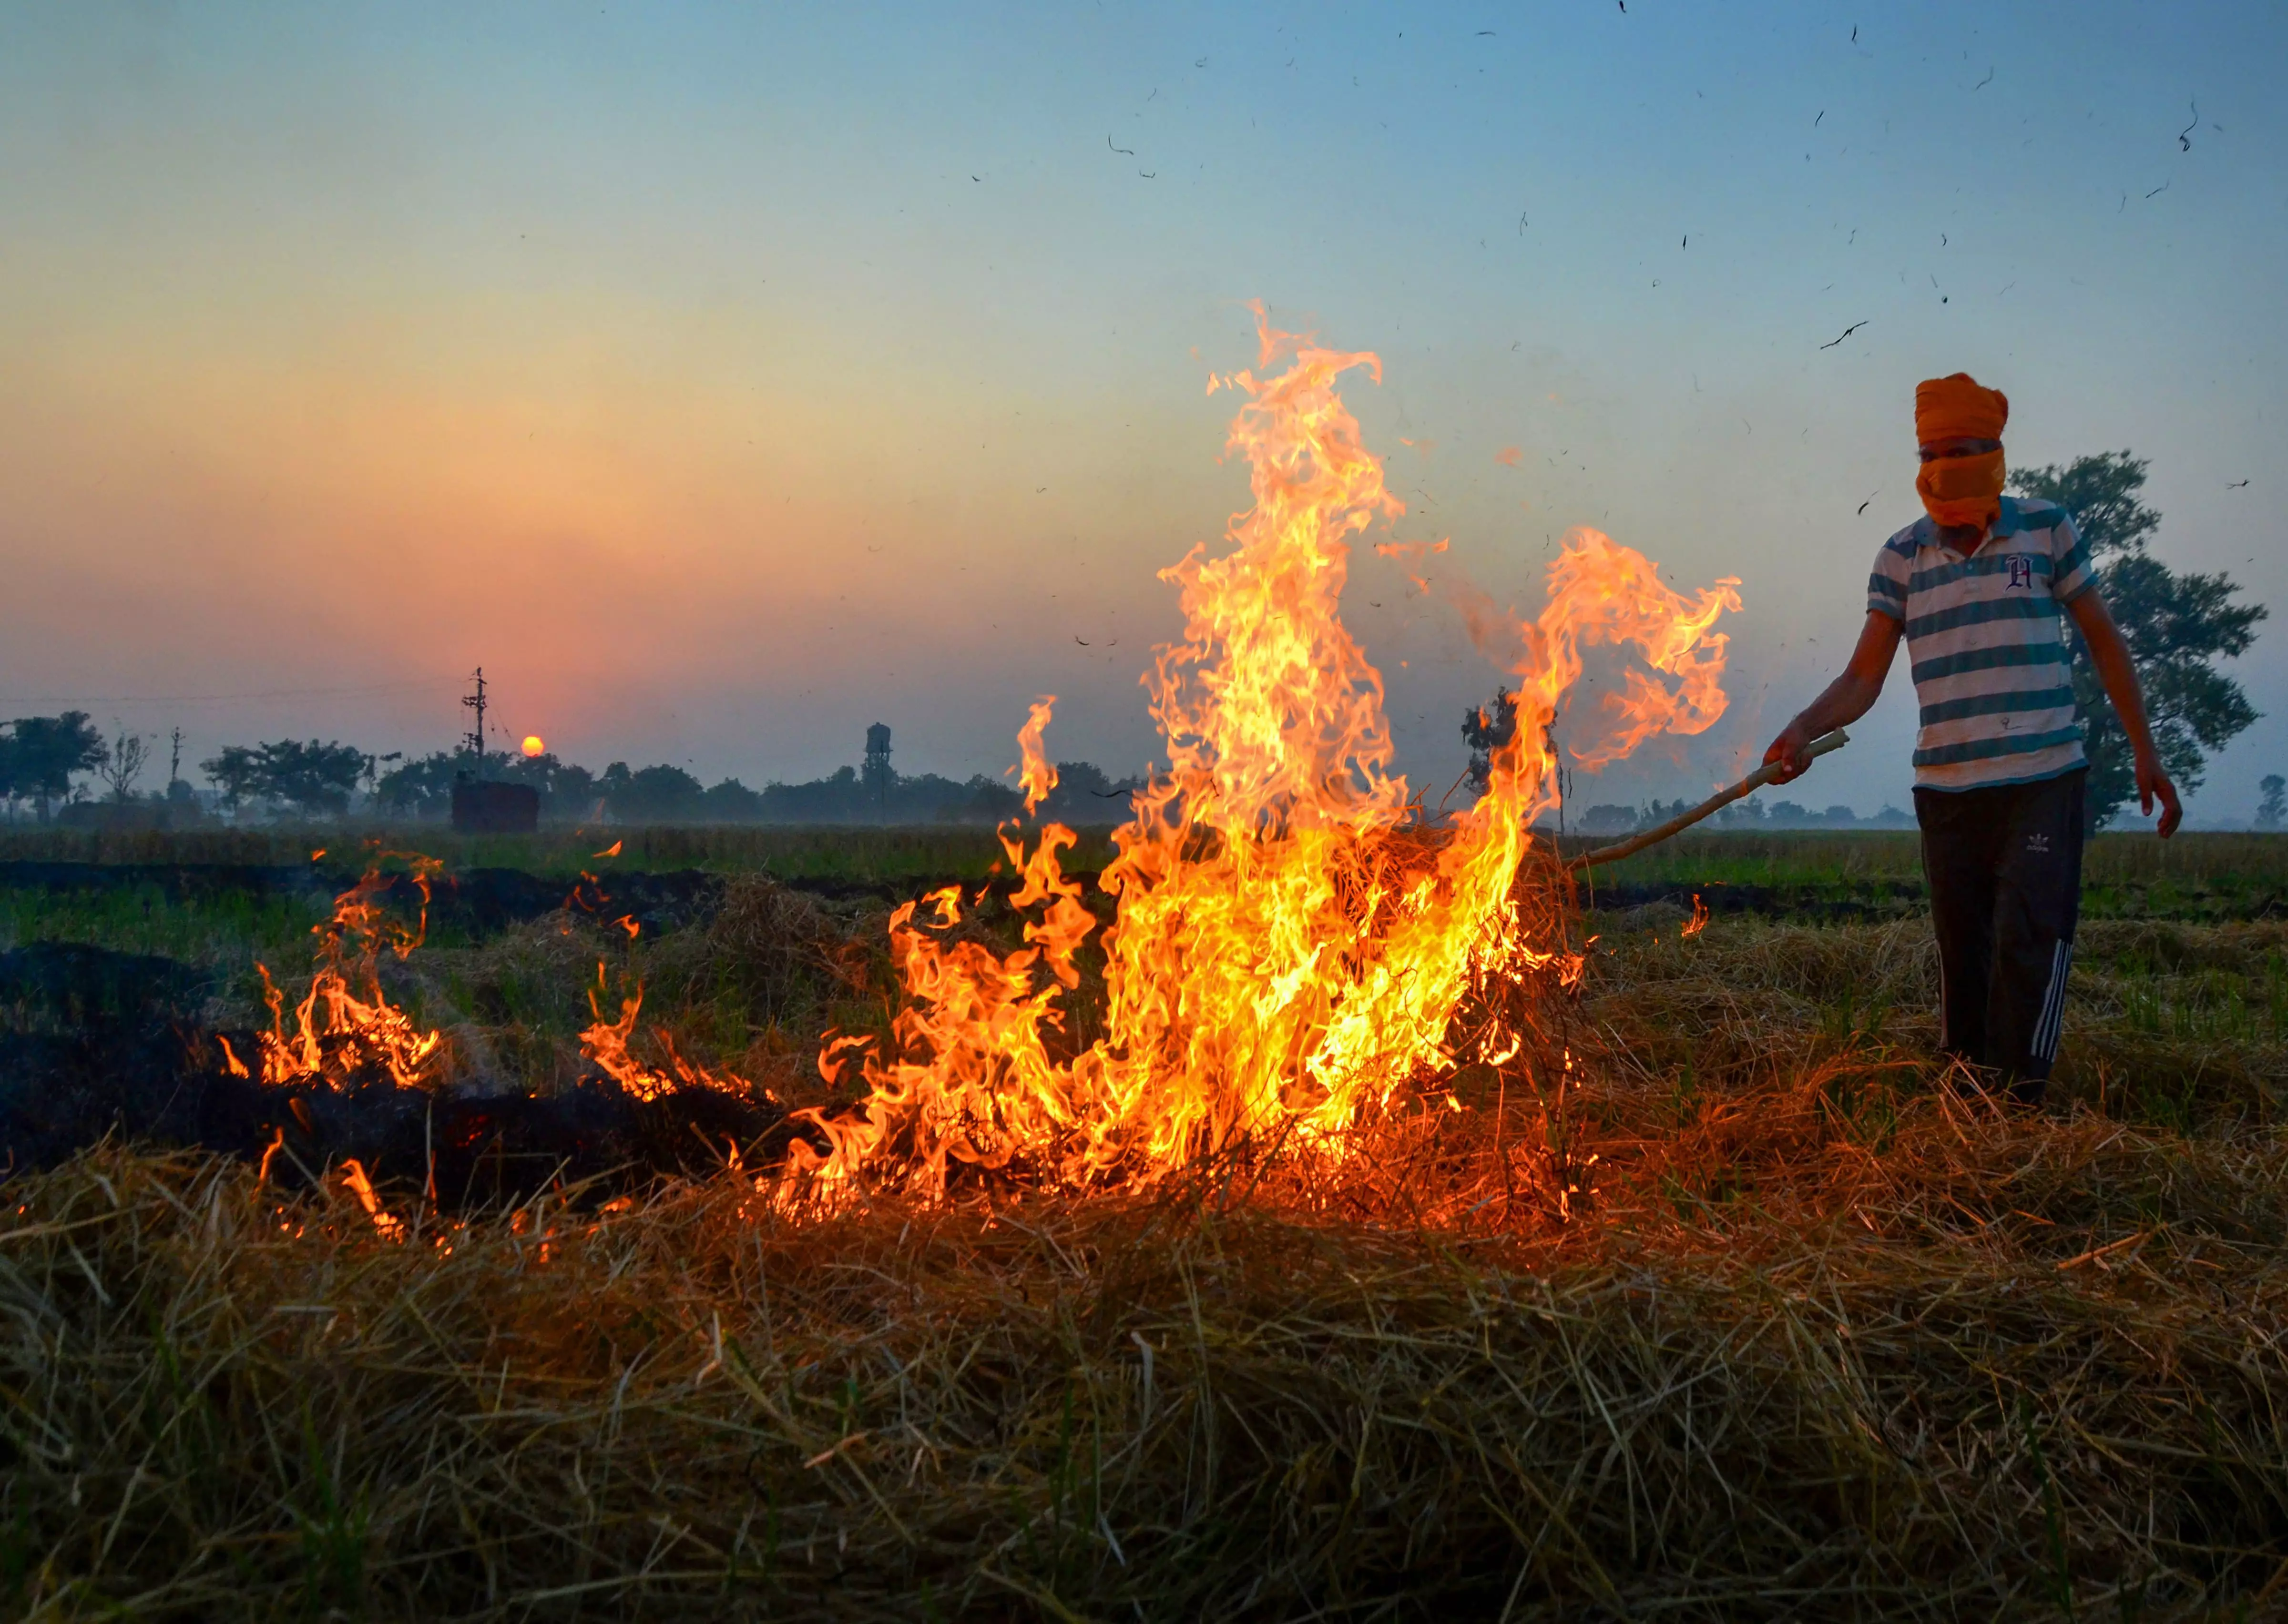 Over 1,500 farm fires reported in Punjab; Haryana AQI in severe, very poor categories